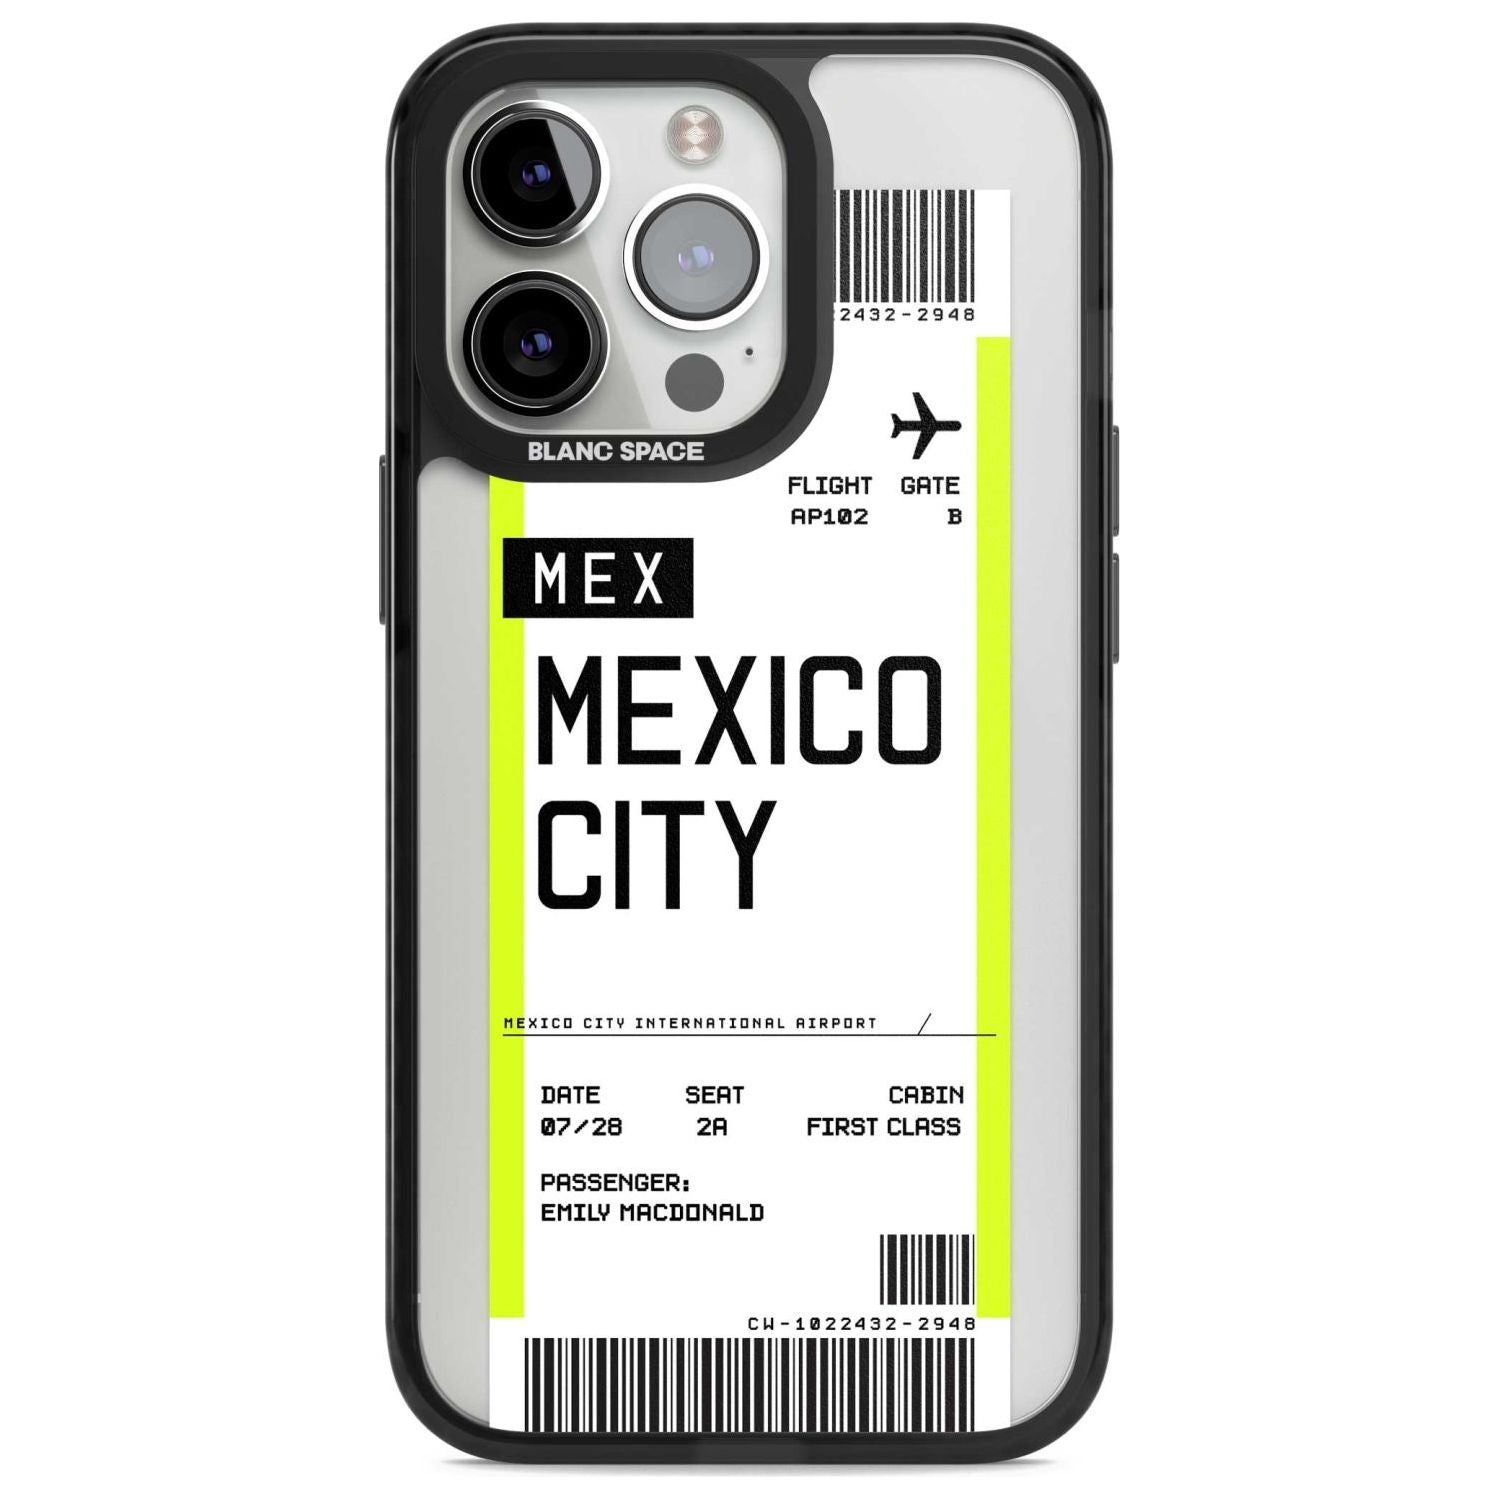 Personalised Mexico City Boarding Pass Custom Phone Case iPhone 15 Pro Max / Magsafe Black Impact Case,iPhone 15 Pro / Magsafe Black Impact Case,iPhone 14 Pro Max / Magsafe Black Impact Case,iPhone 14 Pro / Magsafe Black Impact Case,iPhone 13 Pro / Magsafe Black Impact Case Blanc Space